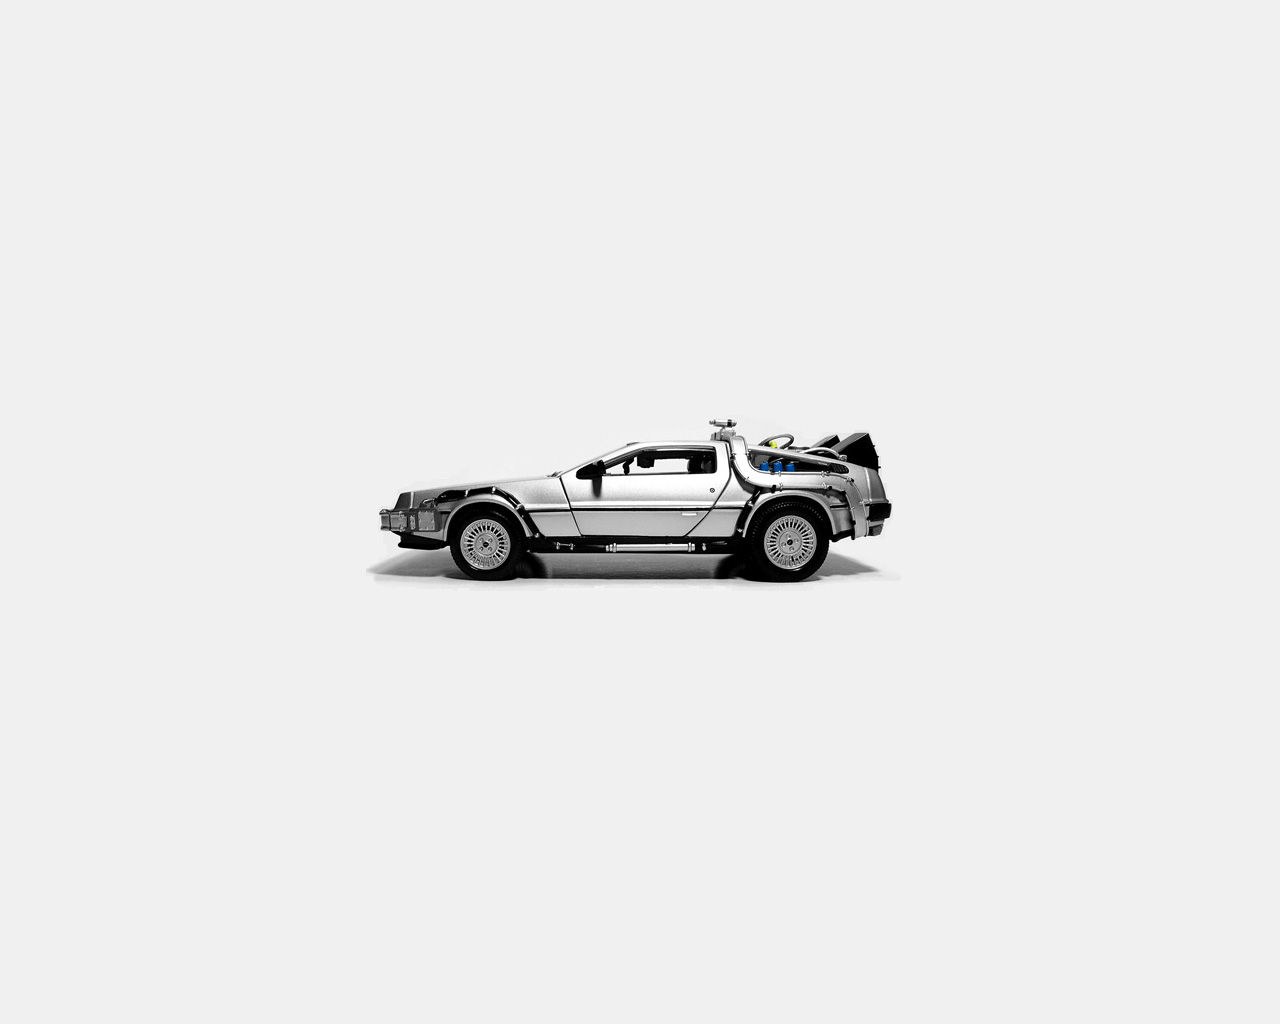 Wallpaper, Back to the Future, Back to the Future II Movies, Back to the Future III Movie, car, Marty McFly, Dr Emmett Brown, minimalism, white 1280x1024